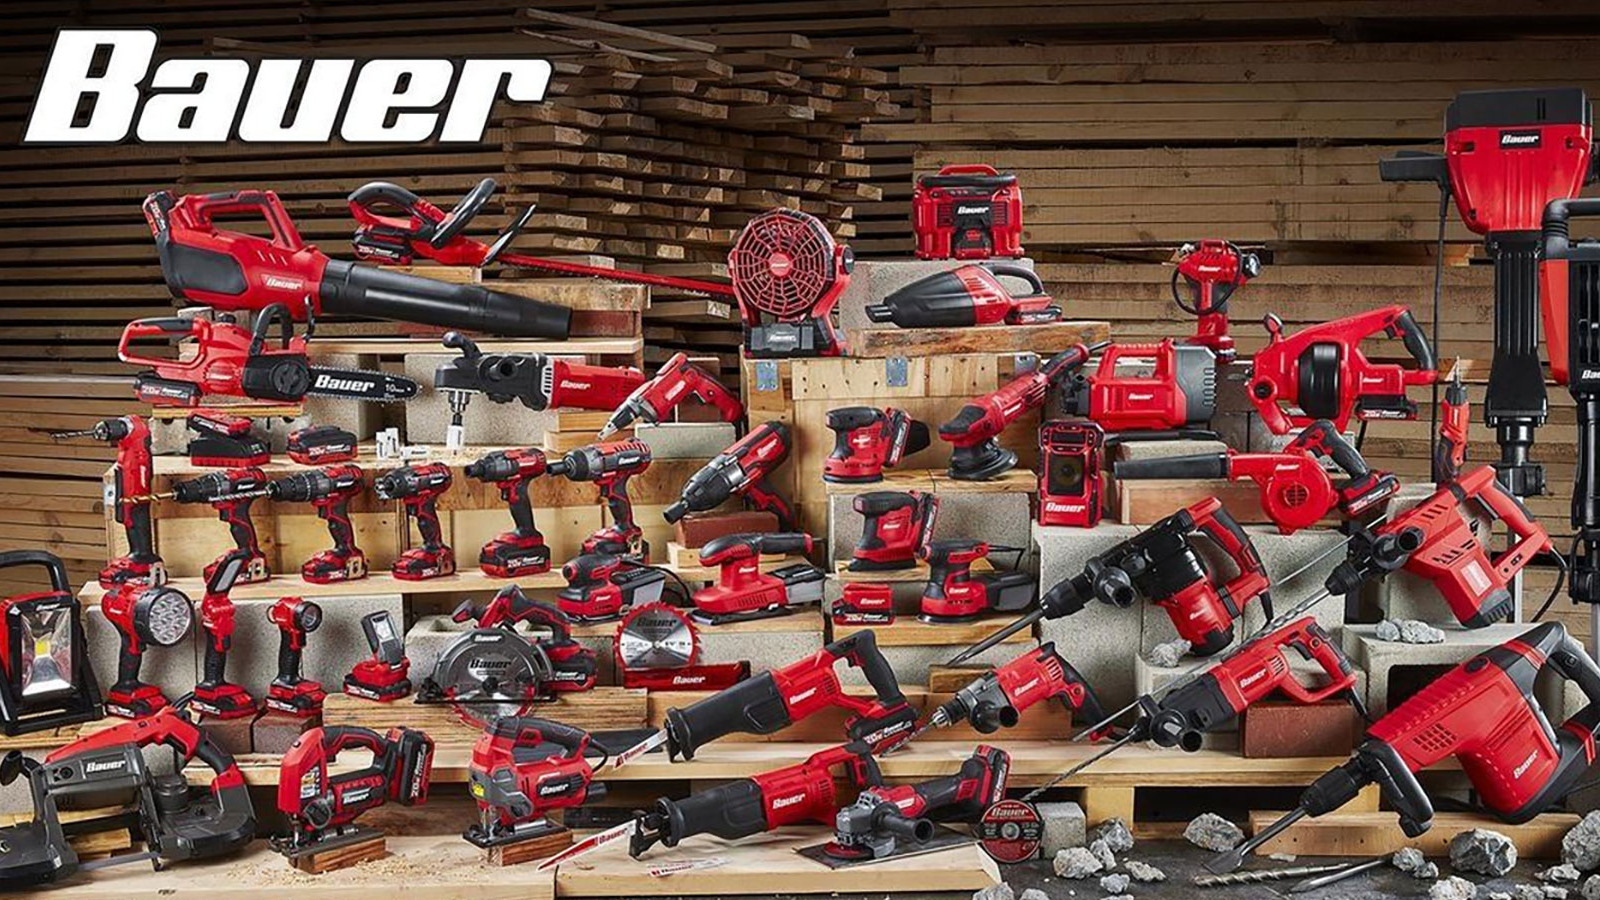 are bauer power tools any good? 2